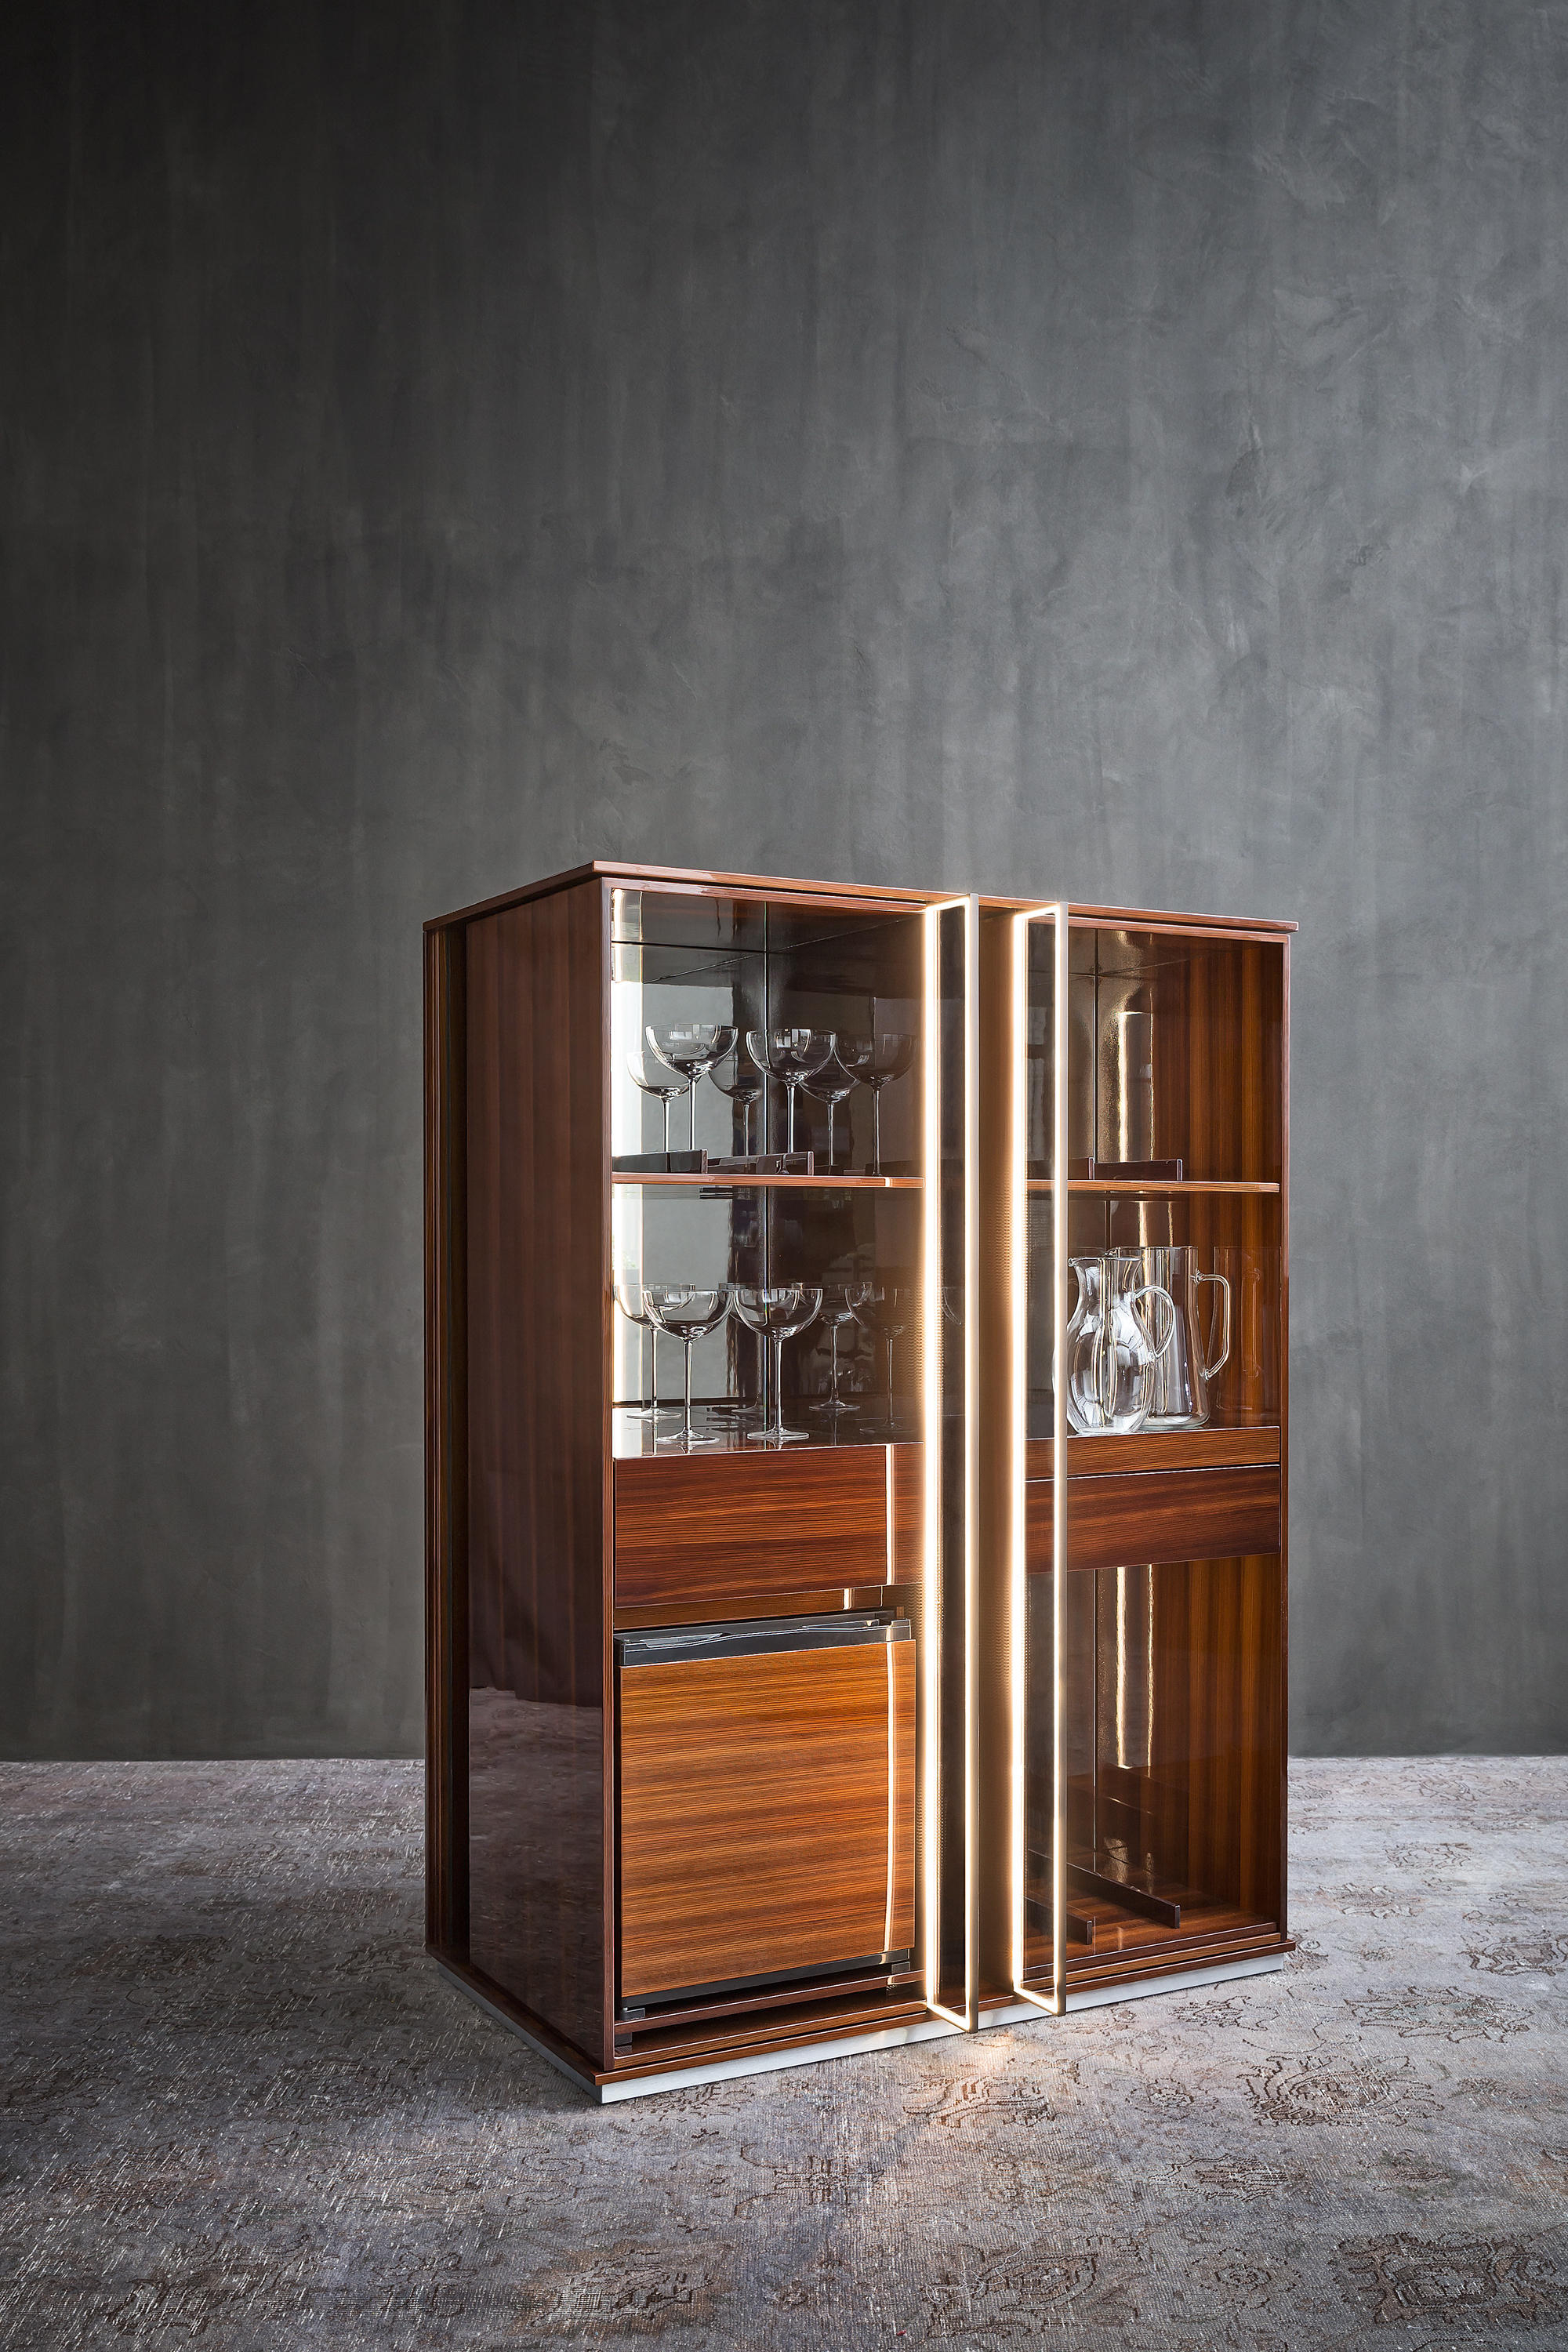 Torri Bar Refrigerator Display Cabinets From Flou Architonic with regard to dimensions 2000 X 3000